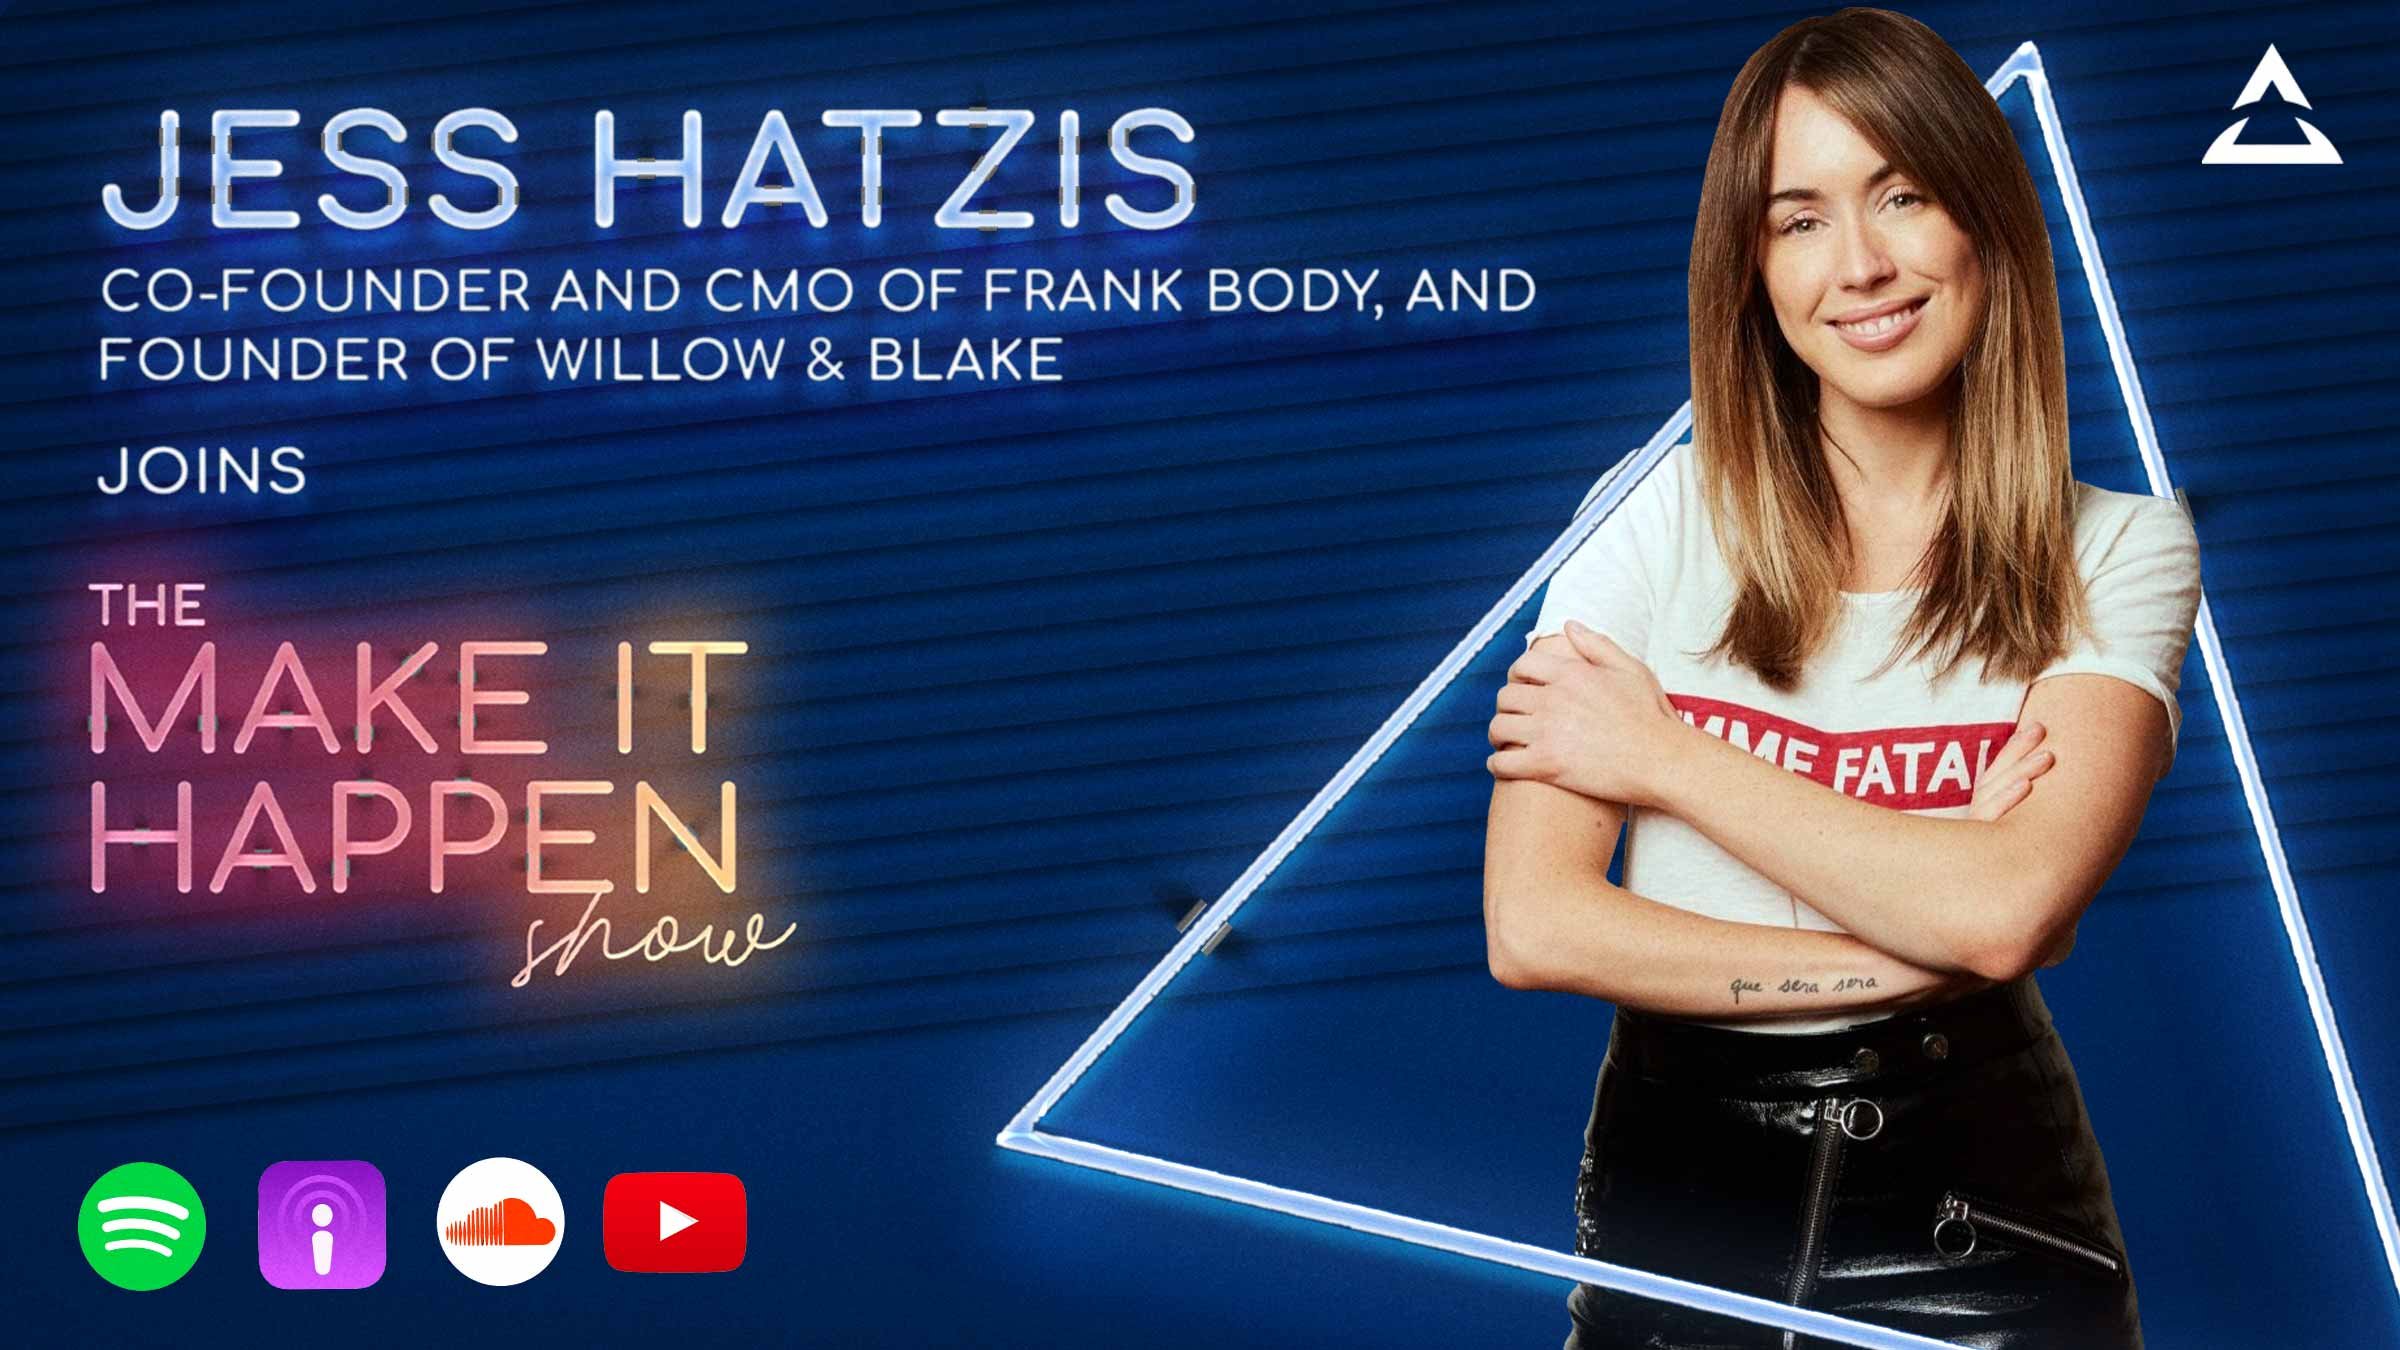 Jess Hatzis, Co-Founder and CMO of frank body and Founder of Willow & Blake join The Make It Happen Show